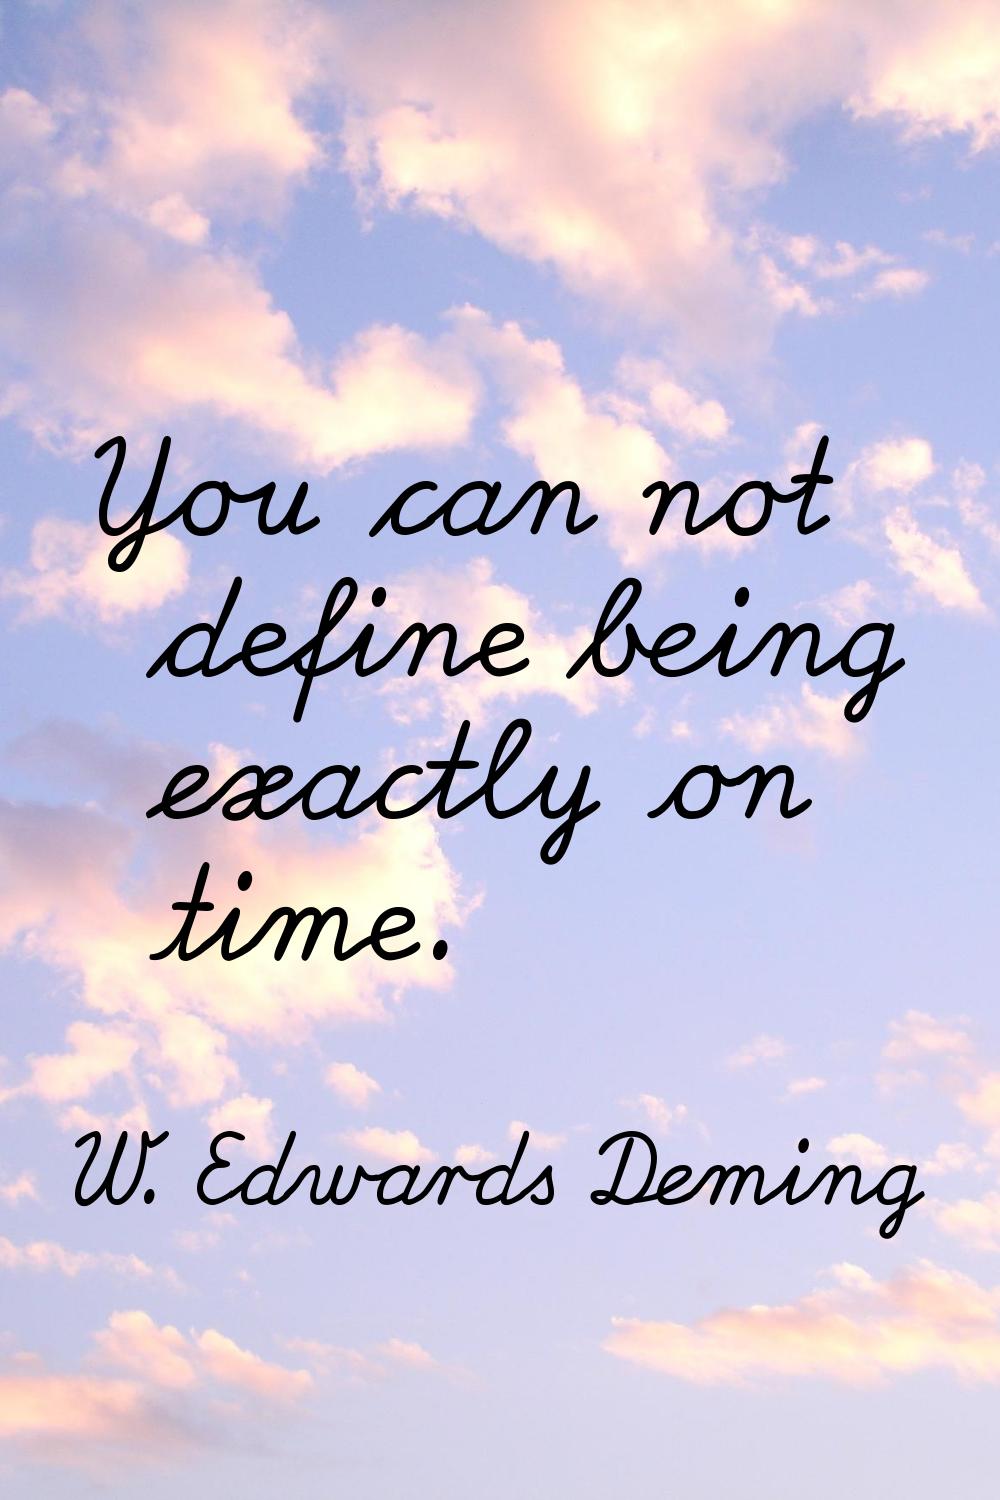 You can not define being exactly on time.